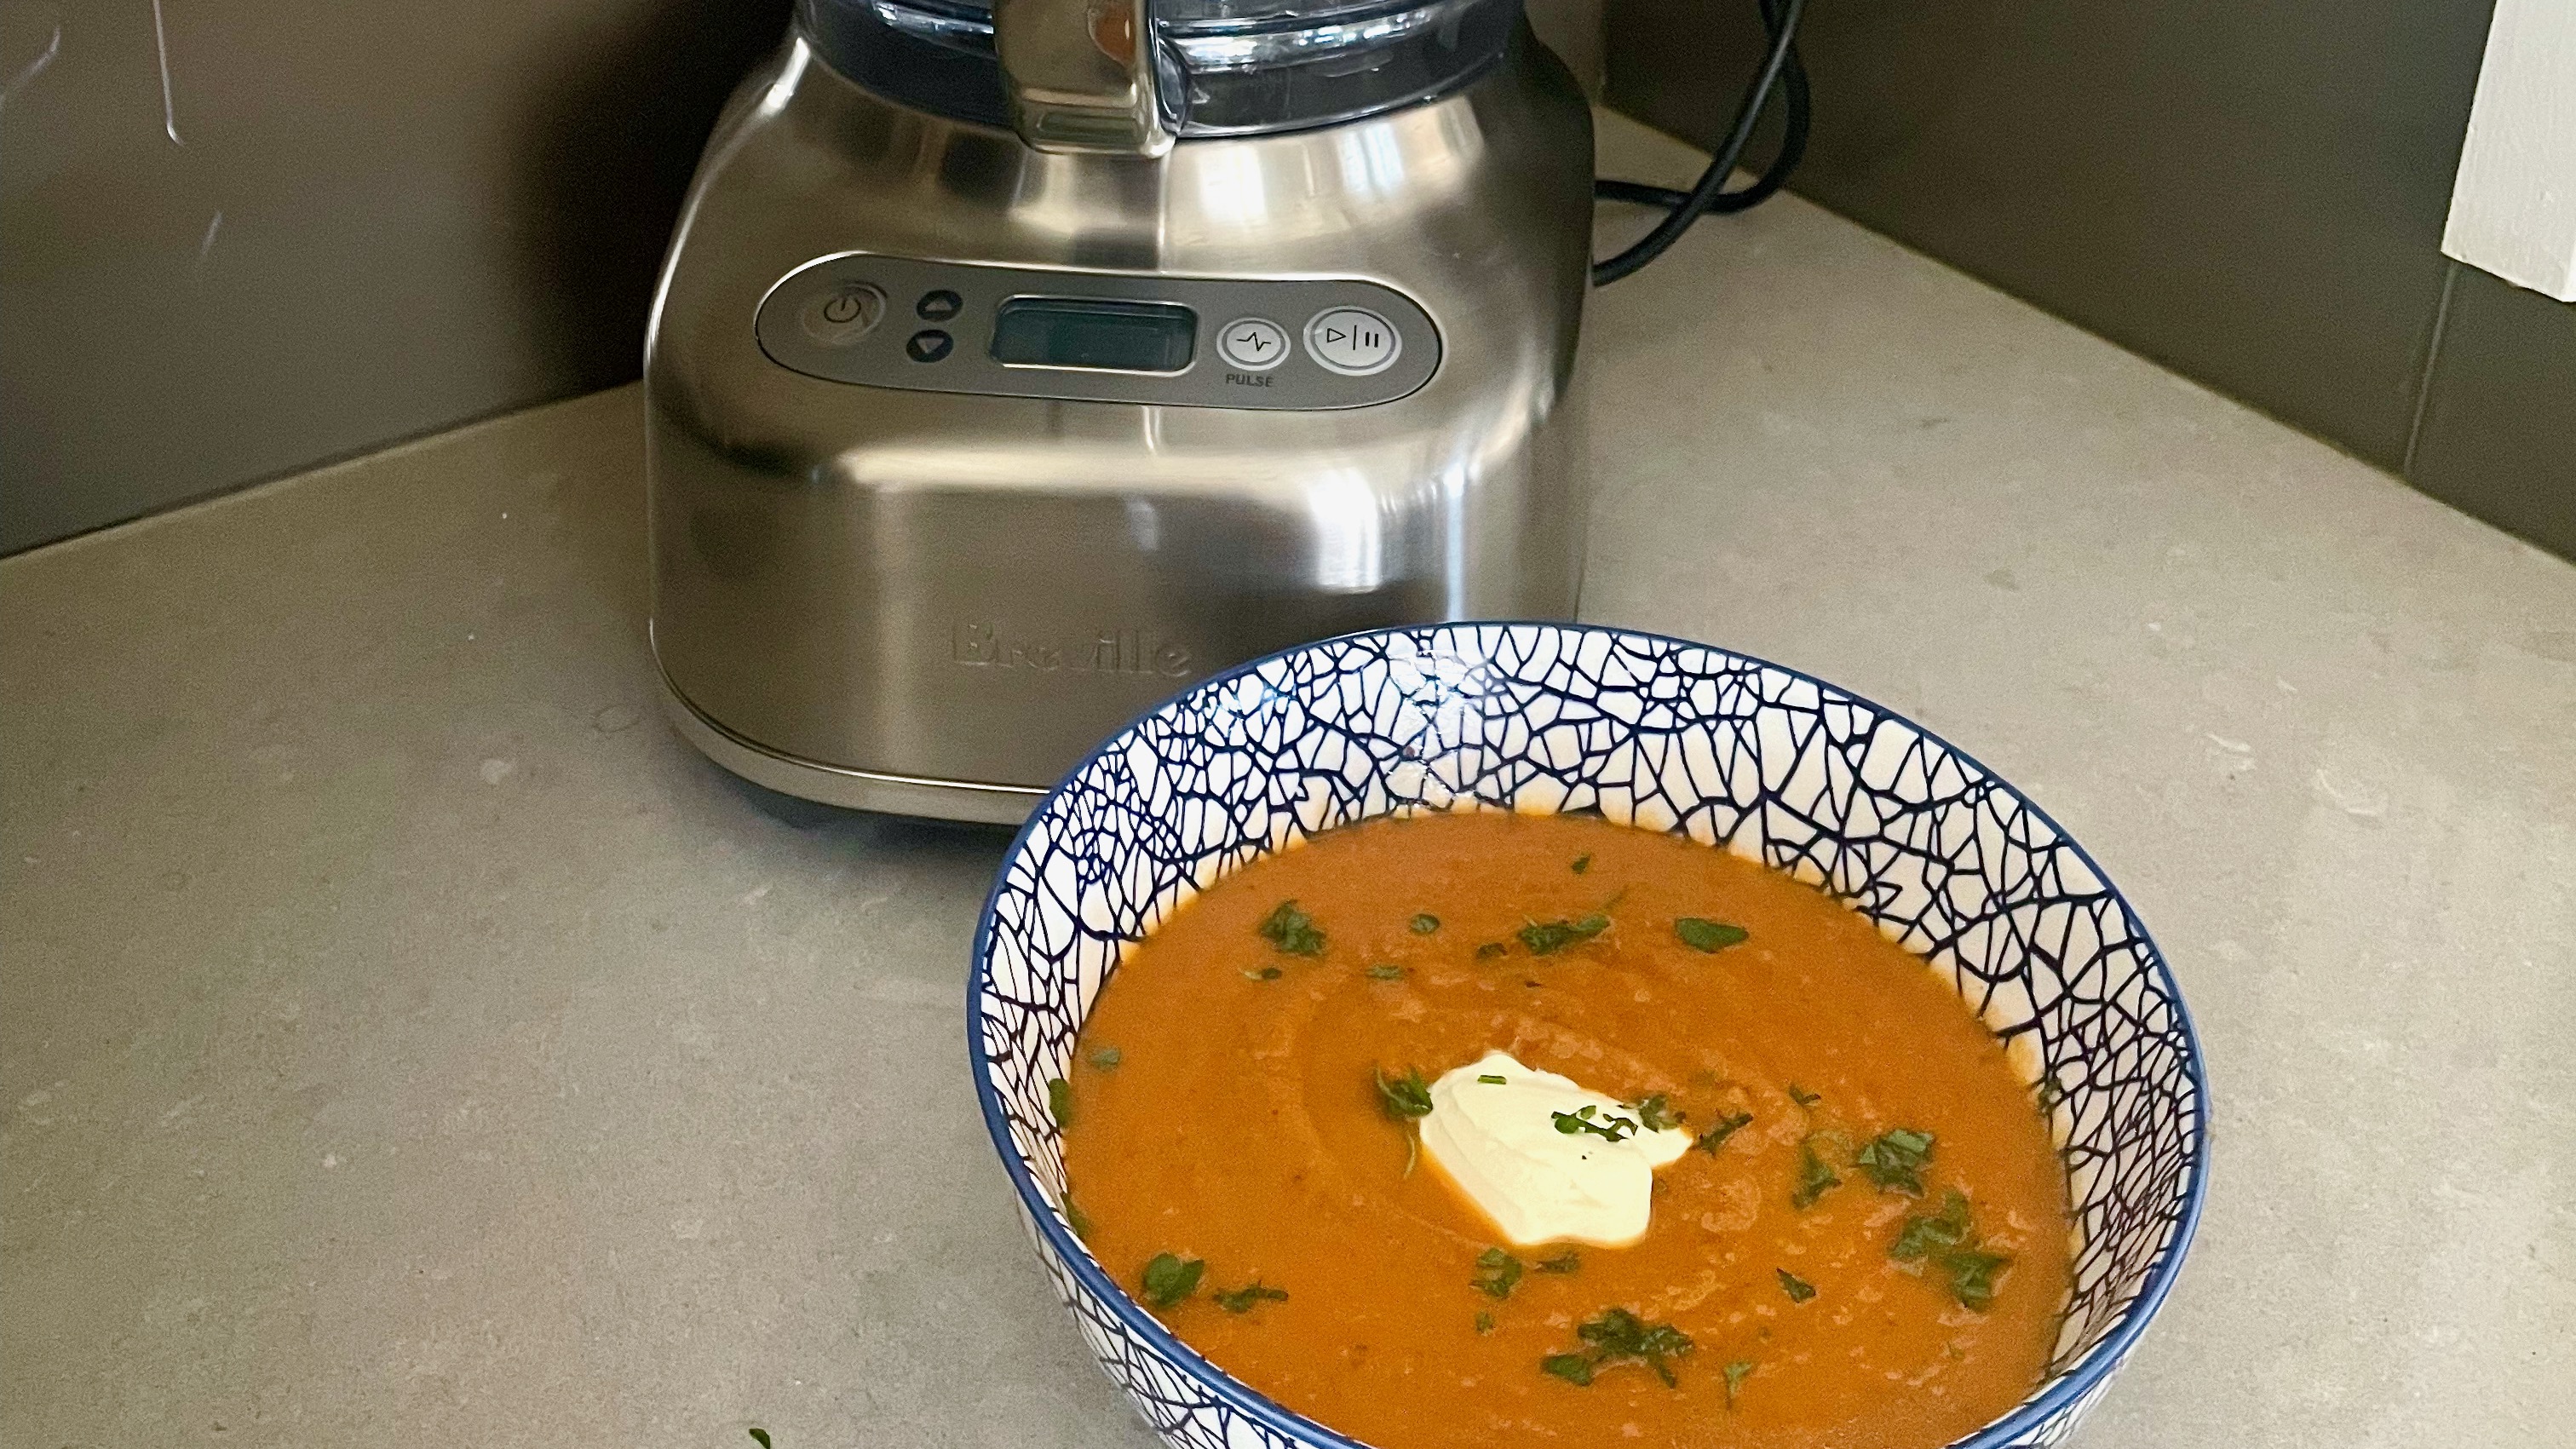 a bowl of vegetable soup in front of the Breville Paradice 16